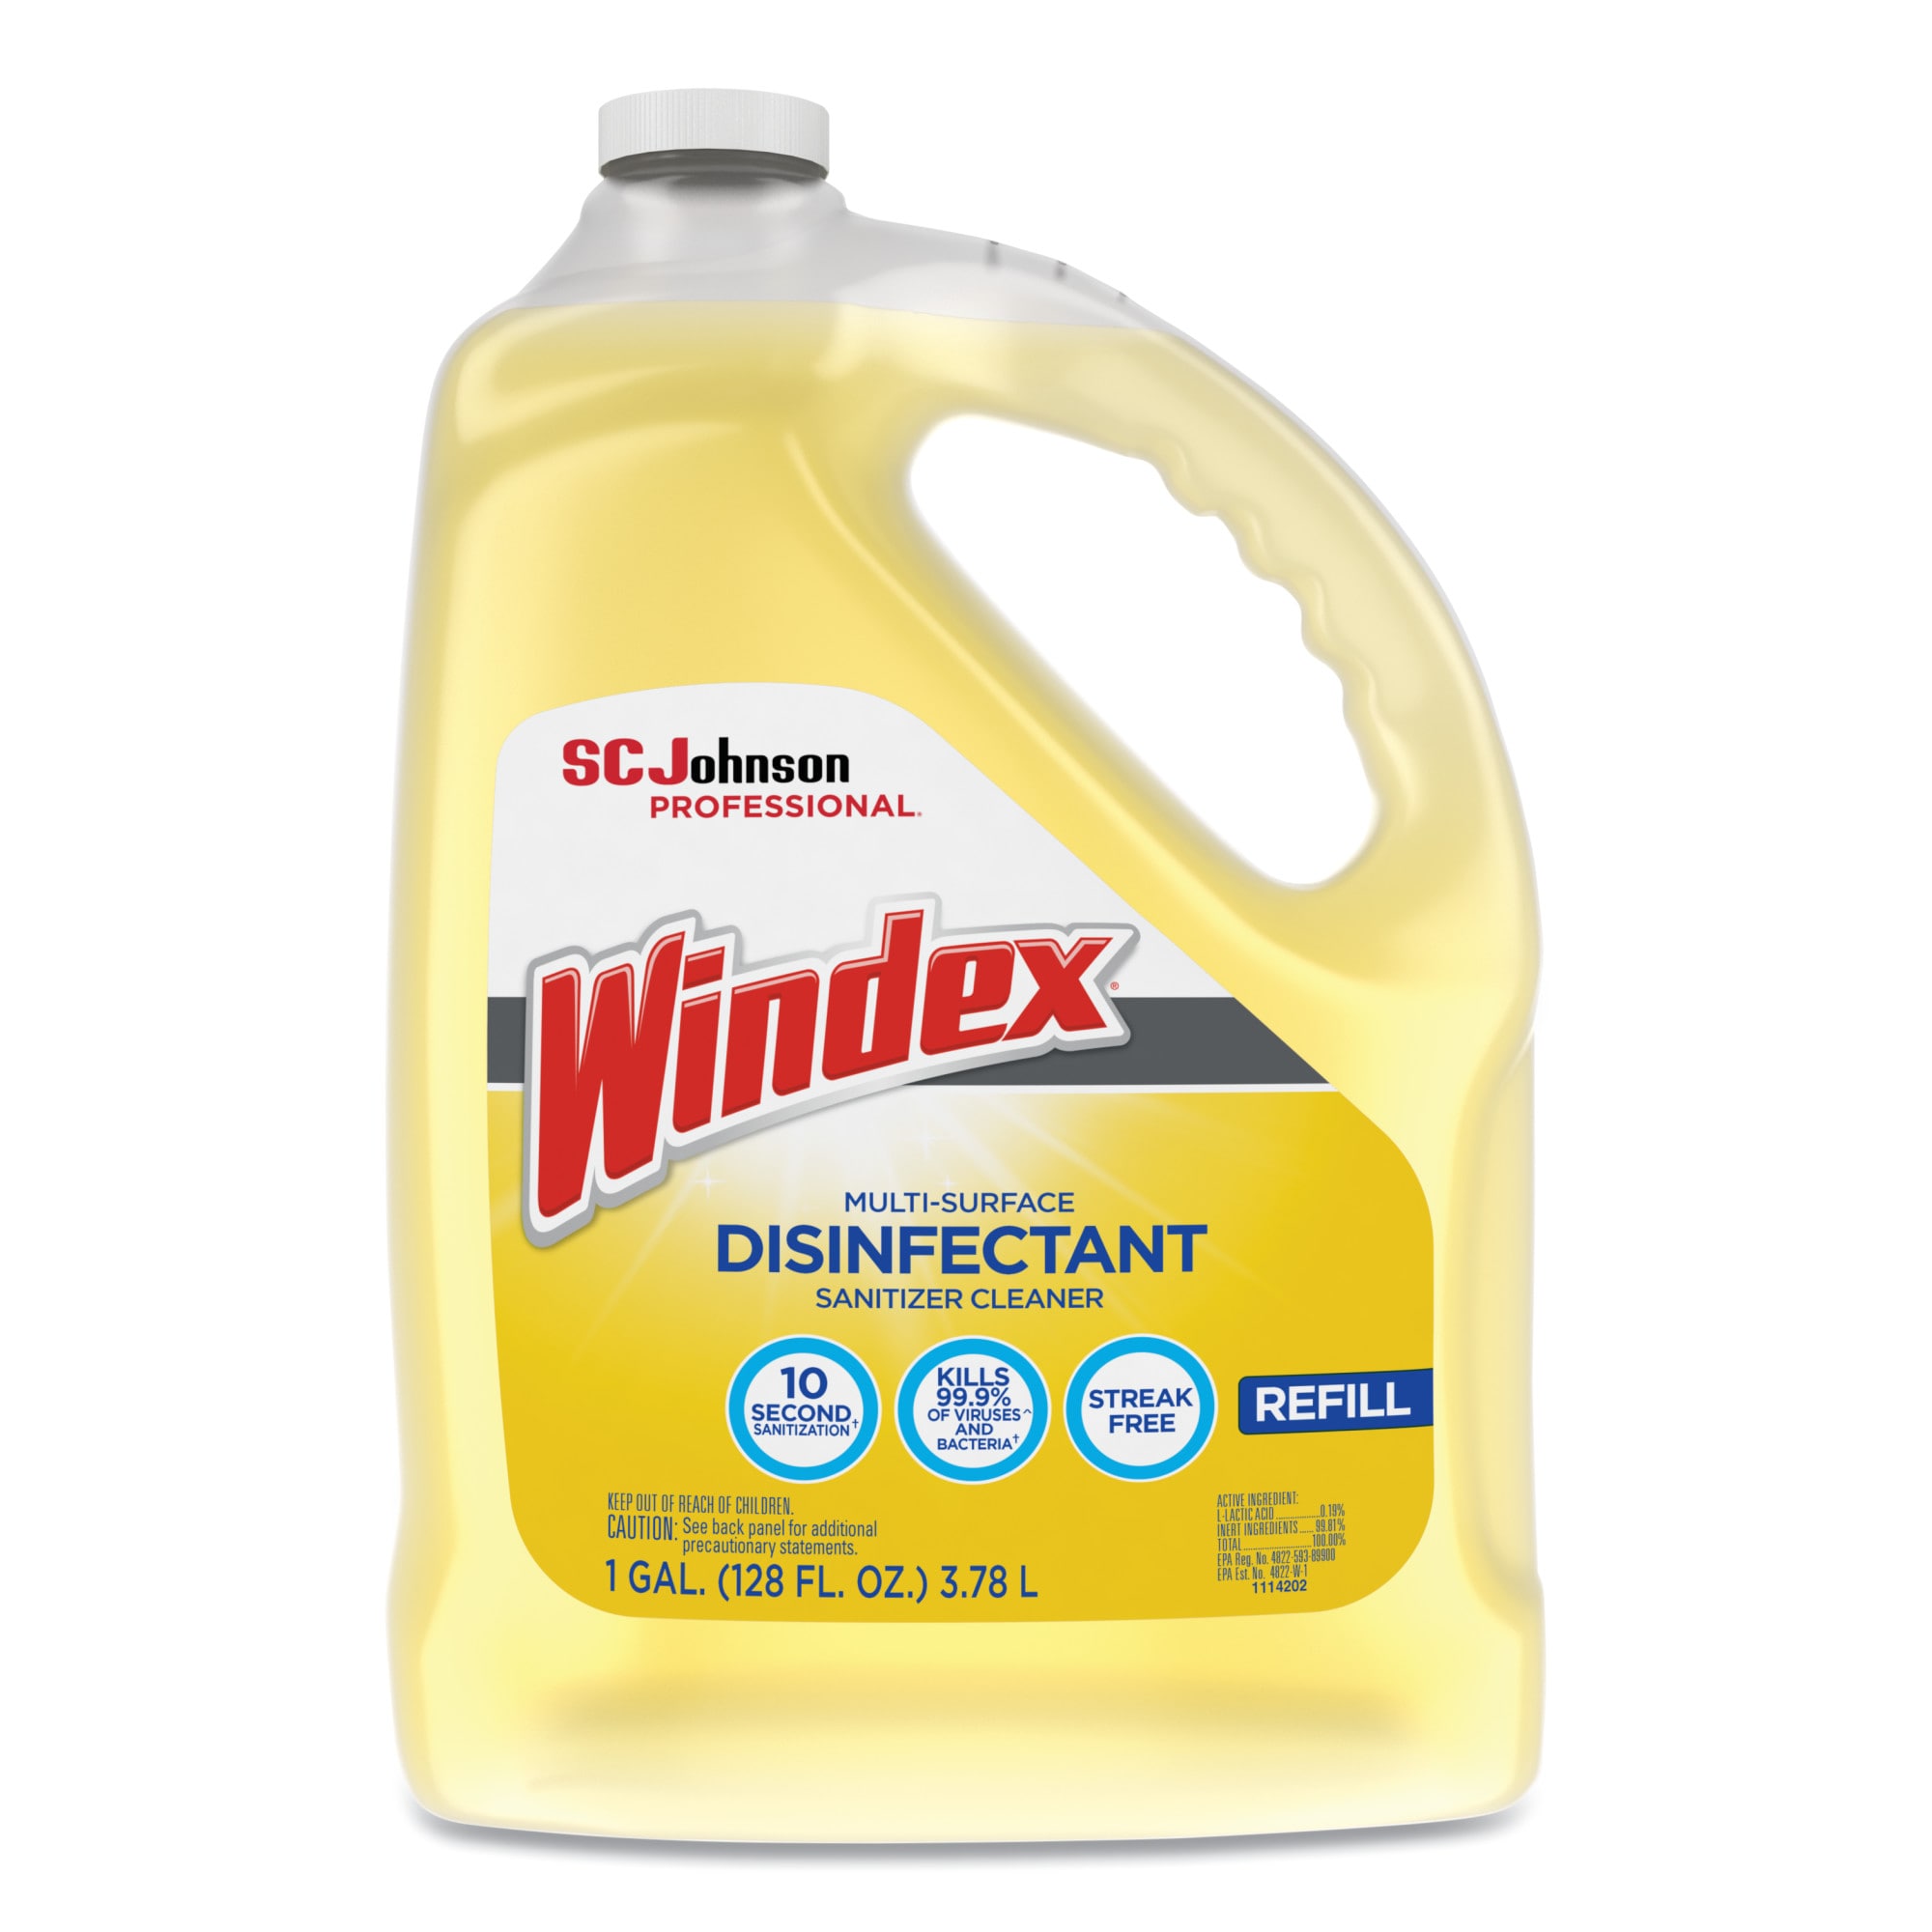 Windex Outdoor All-in-One Starter Kit 2 count, All-in-one glass